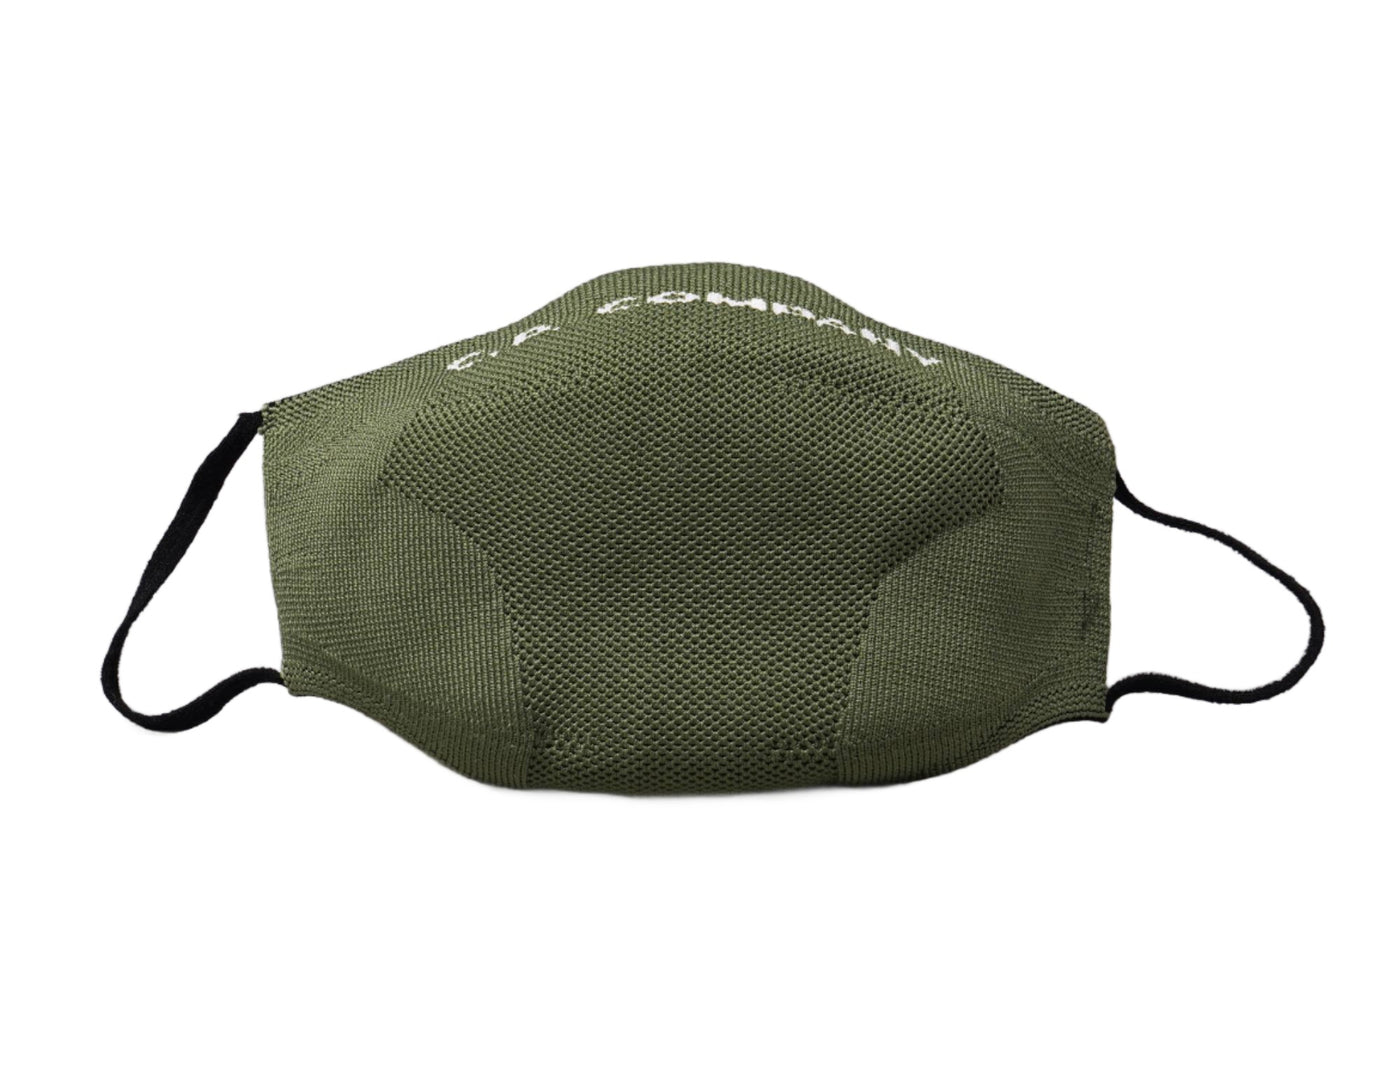 Accessorie Face Mask C.P. Company Dryarn® Face Mask Olive Green C.P. Company Face Mask / Green / One Size